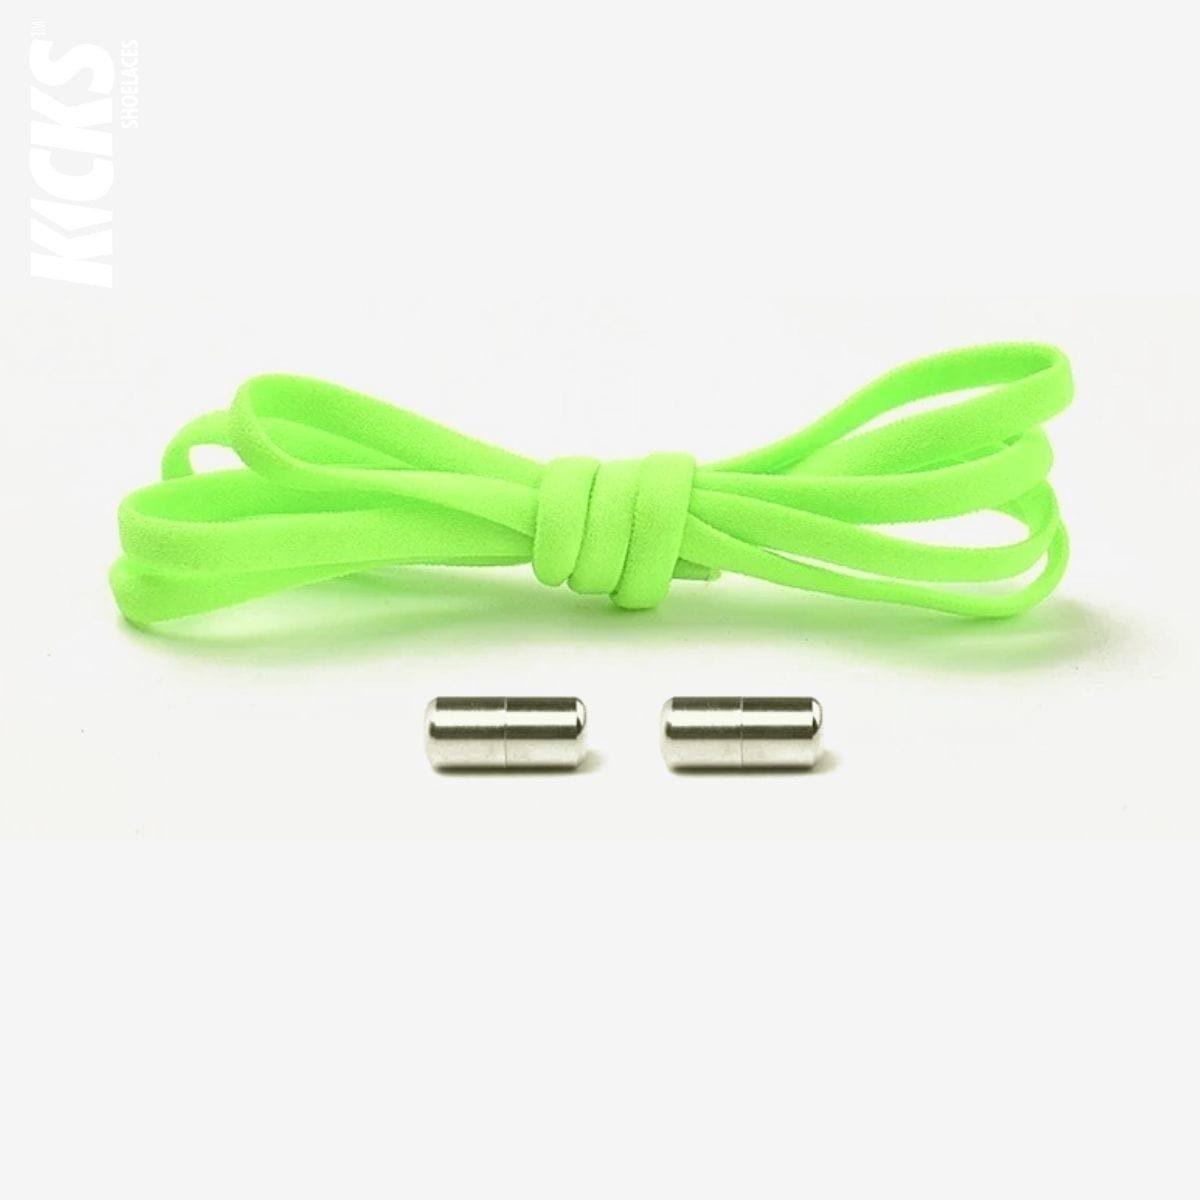 fluorescent-green-kids-elastic-no-tie-shoe-laces-for-sneakers-by-kicks-shoelaces